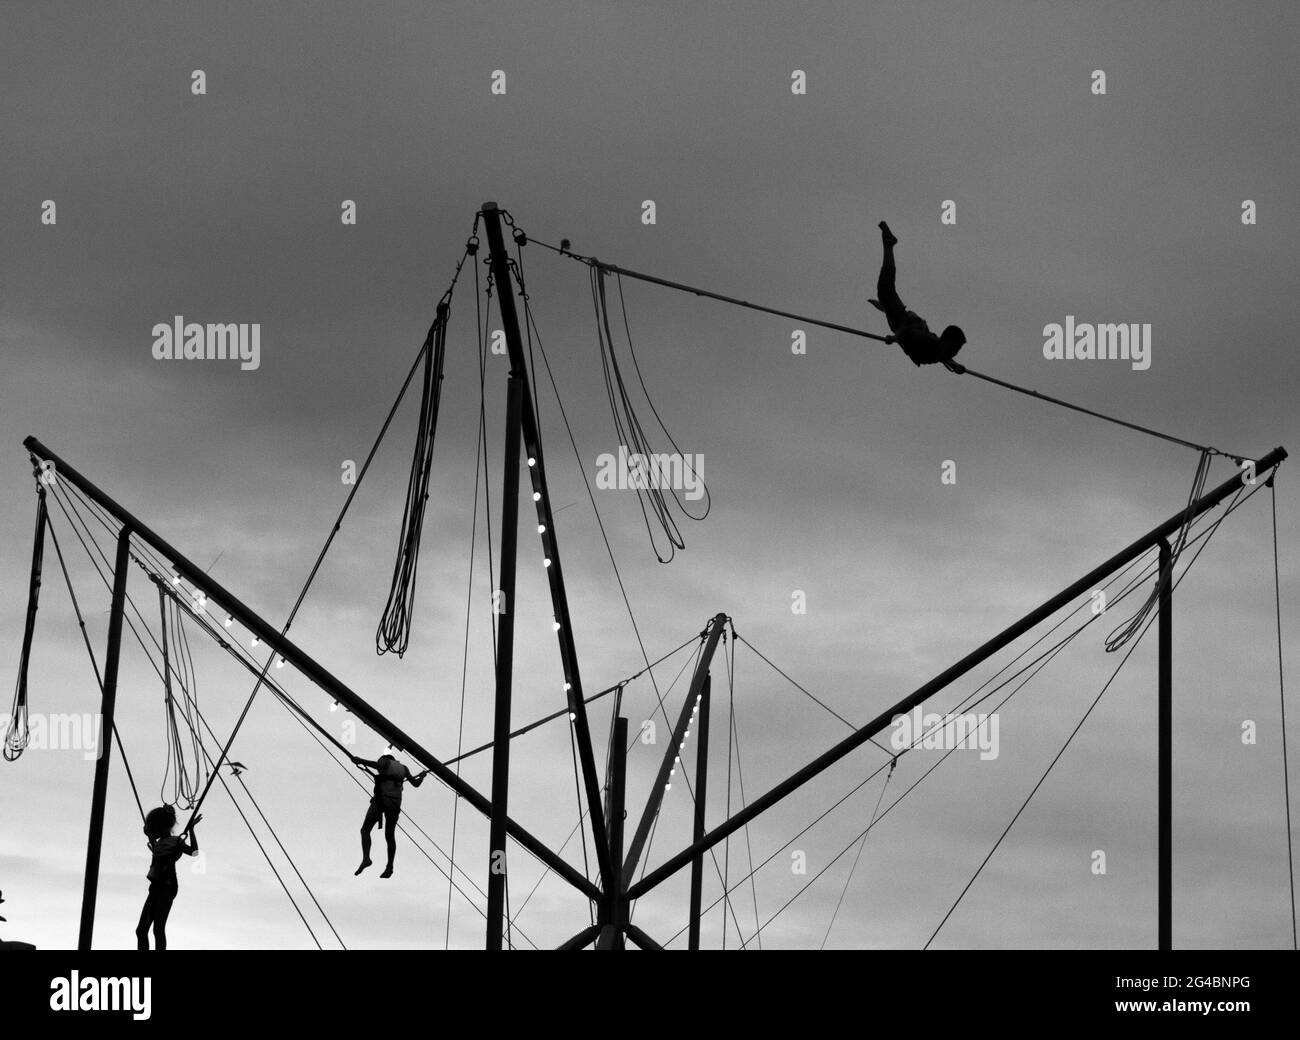 Jumping, playing and having fun in black and white photo scene Stock Photo